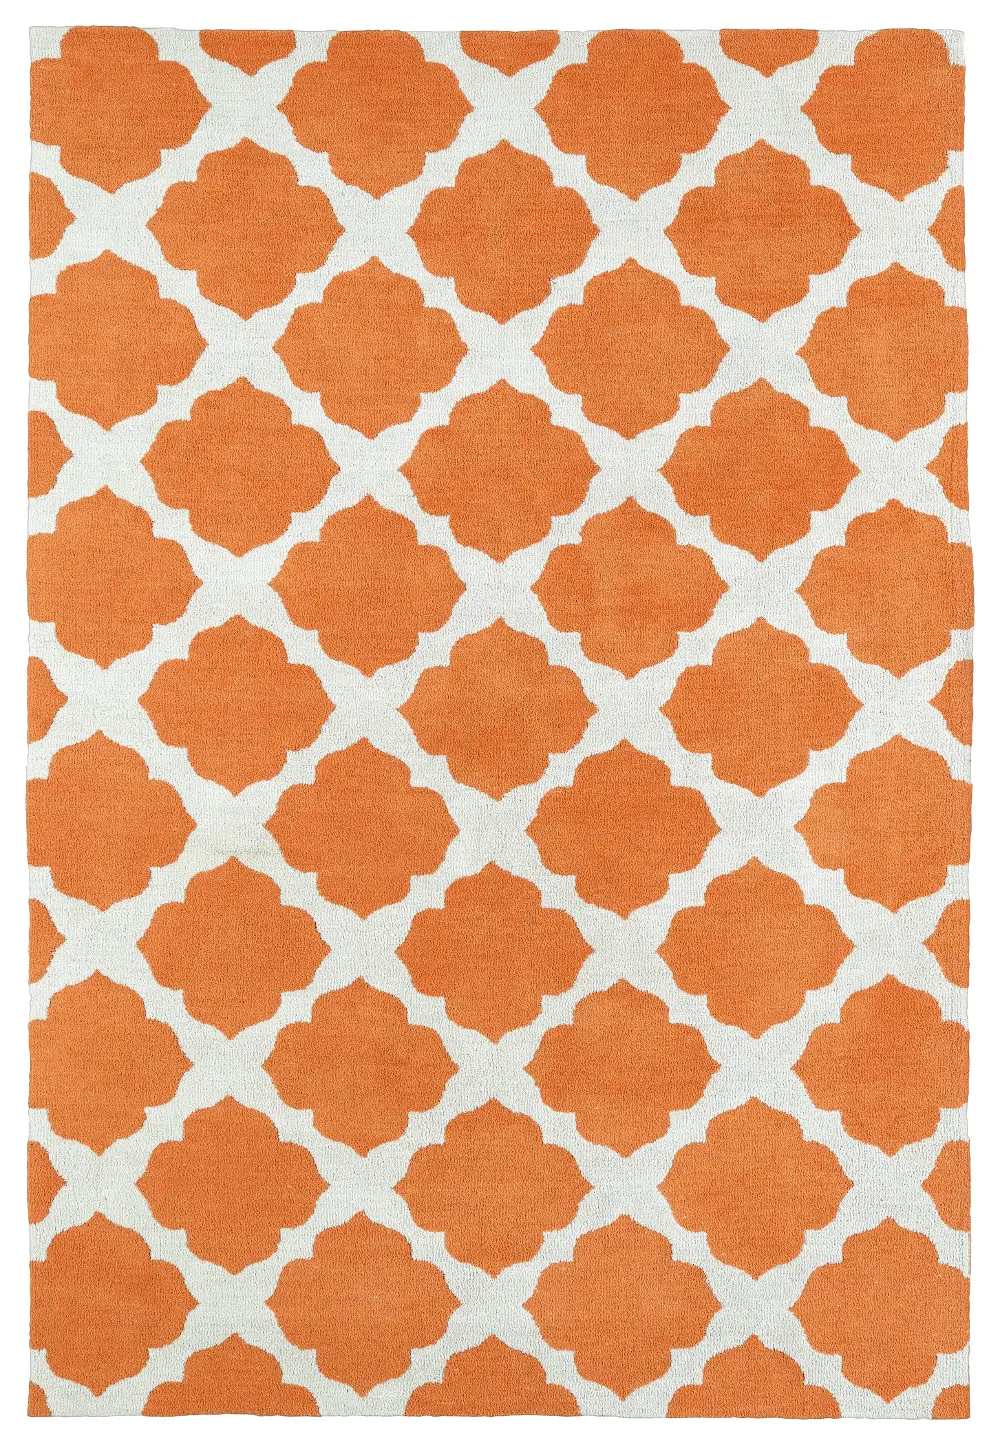 4 x 6 Small Orange and Ivory Area Rug - Lily & Liam-1